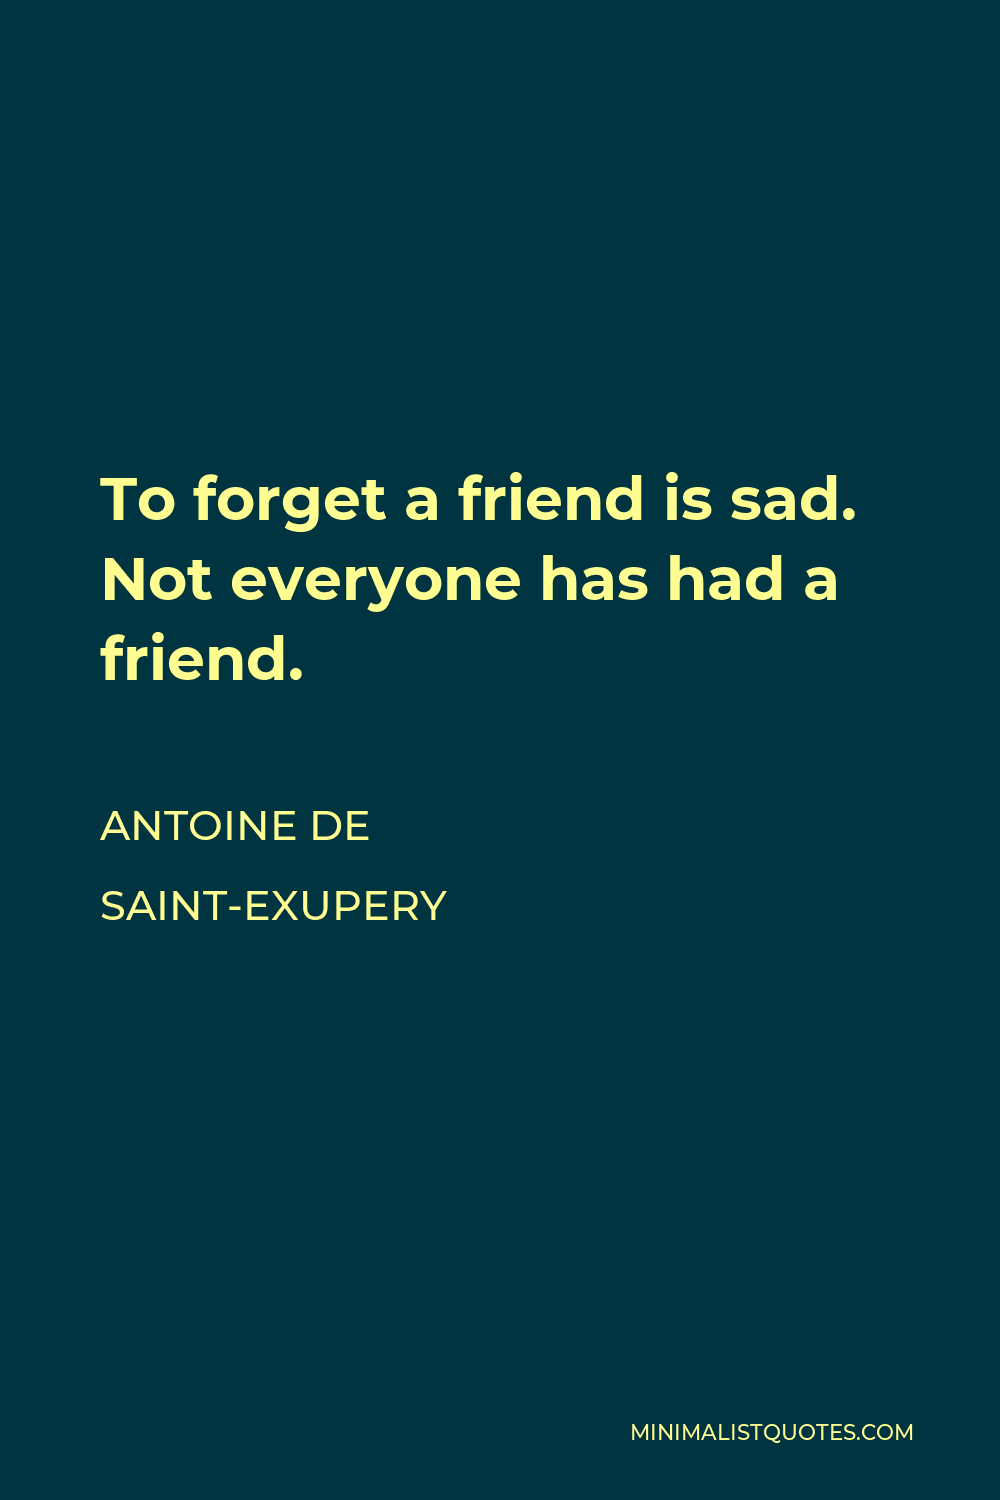 Antoine de Saint-Exupery Quote - To forget a friend is sad. Not everyone has had a friend.